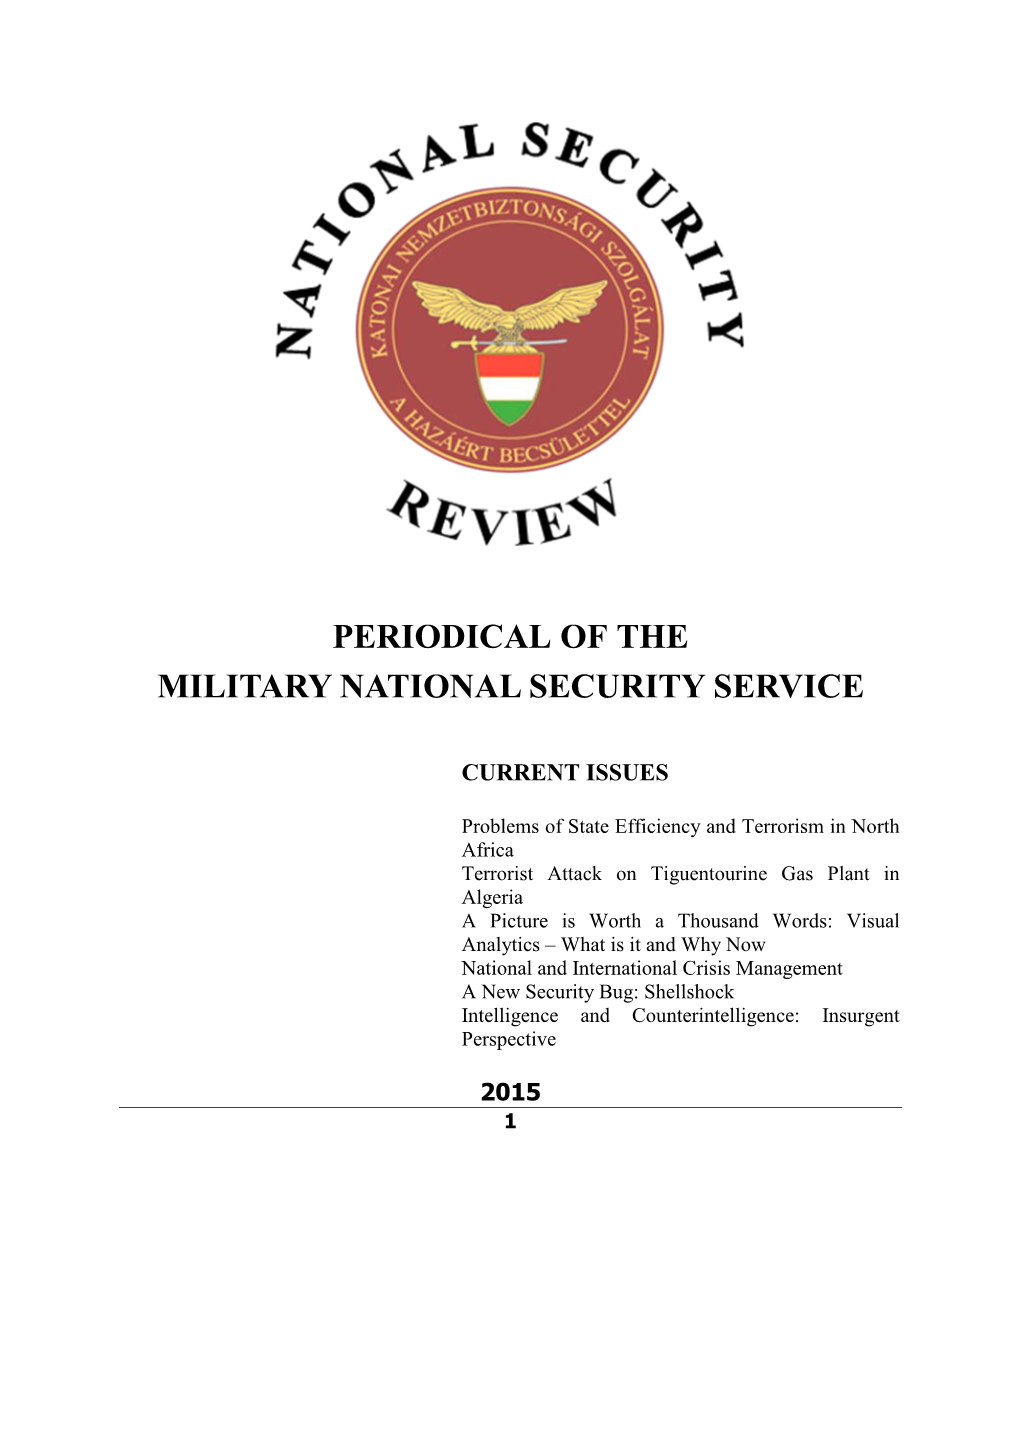 Periodical of the Military National Security Service